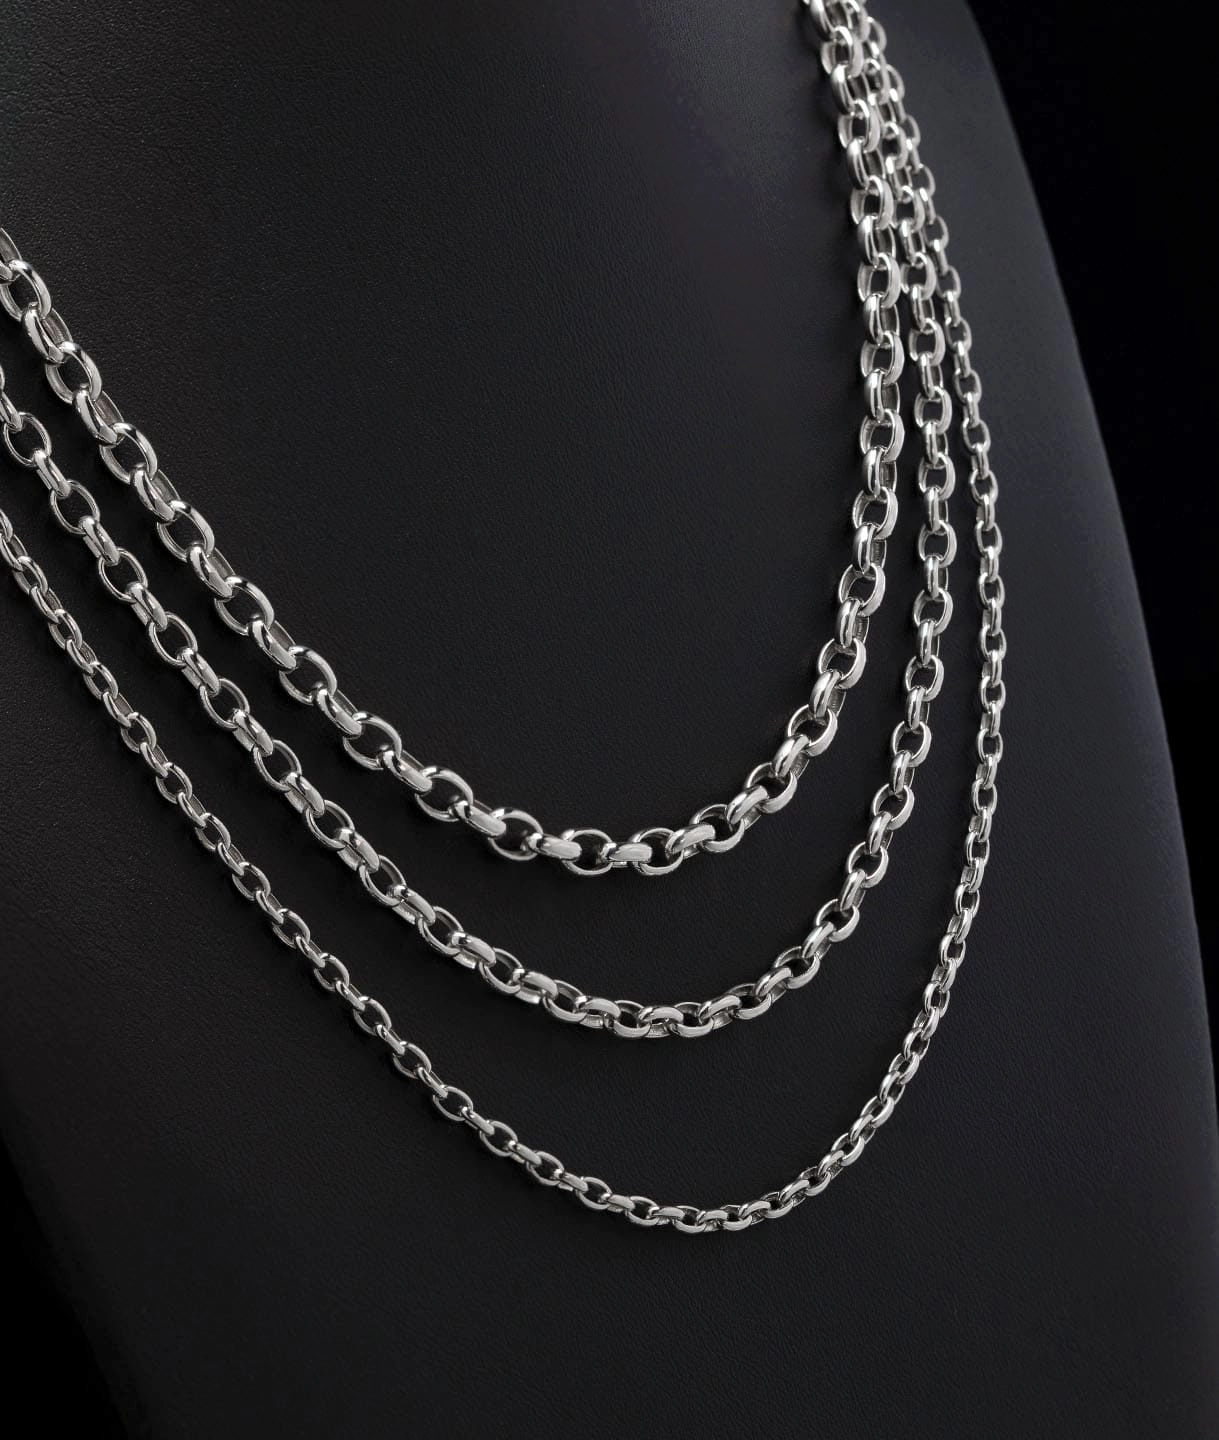 A 4mm men's platinum rolo link chain necklace with a durable clasp